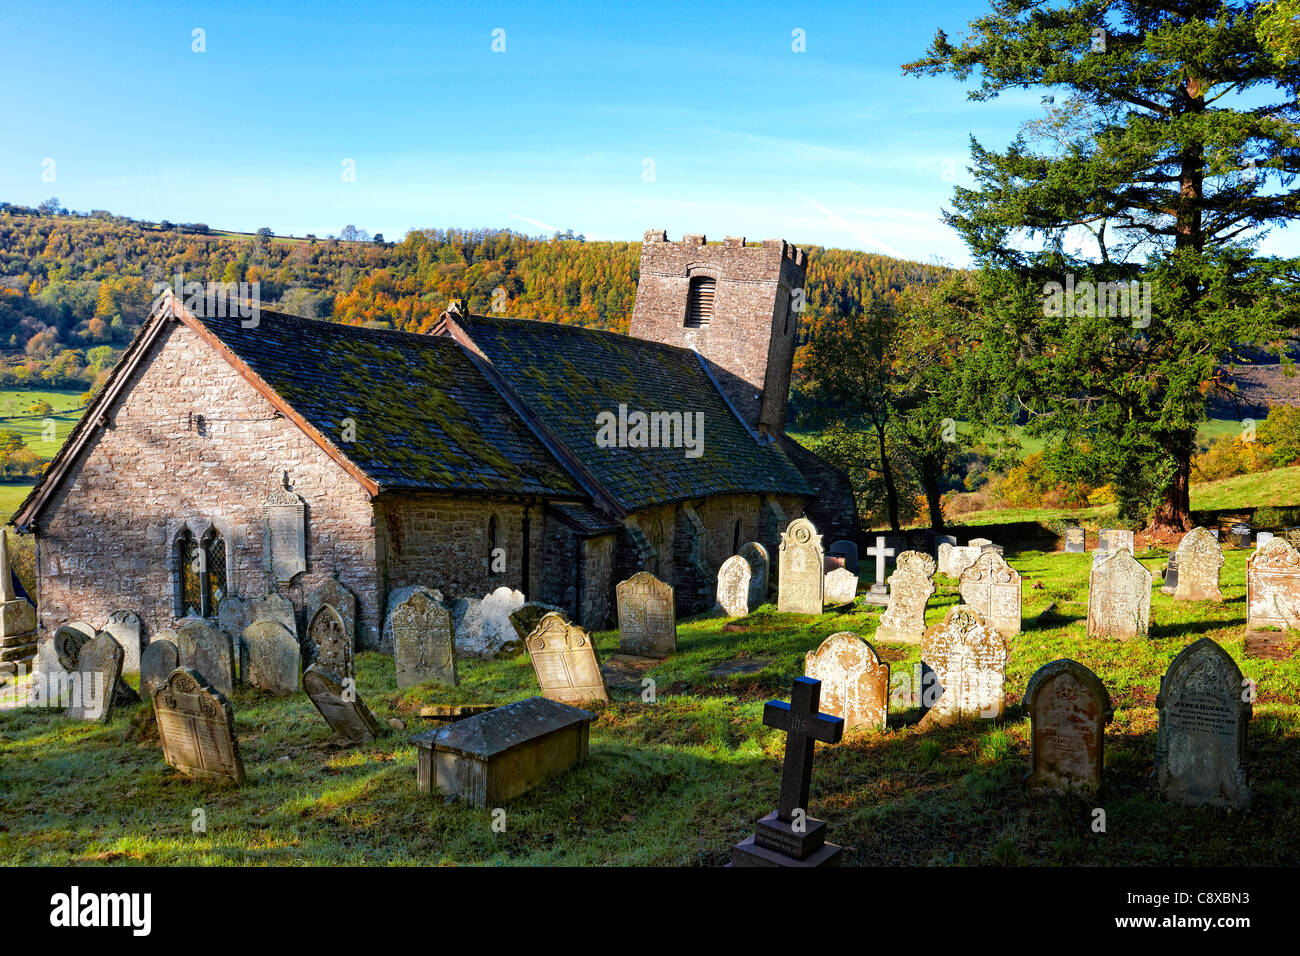 Cwmyoy church in the Vale of Ewyas, Brecon Beacons National Park. It has been described as the most crooked church in the UK Stock Photo